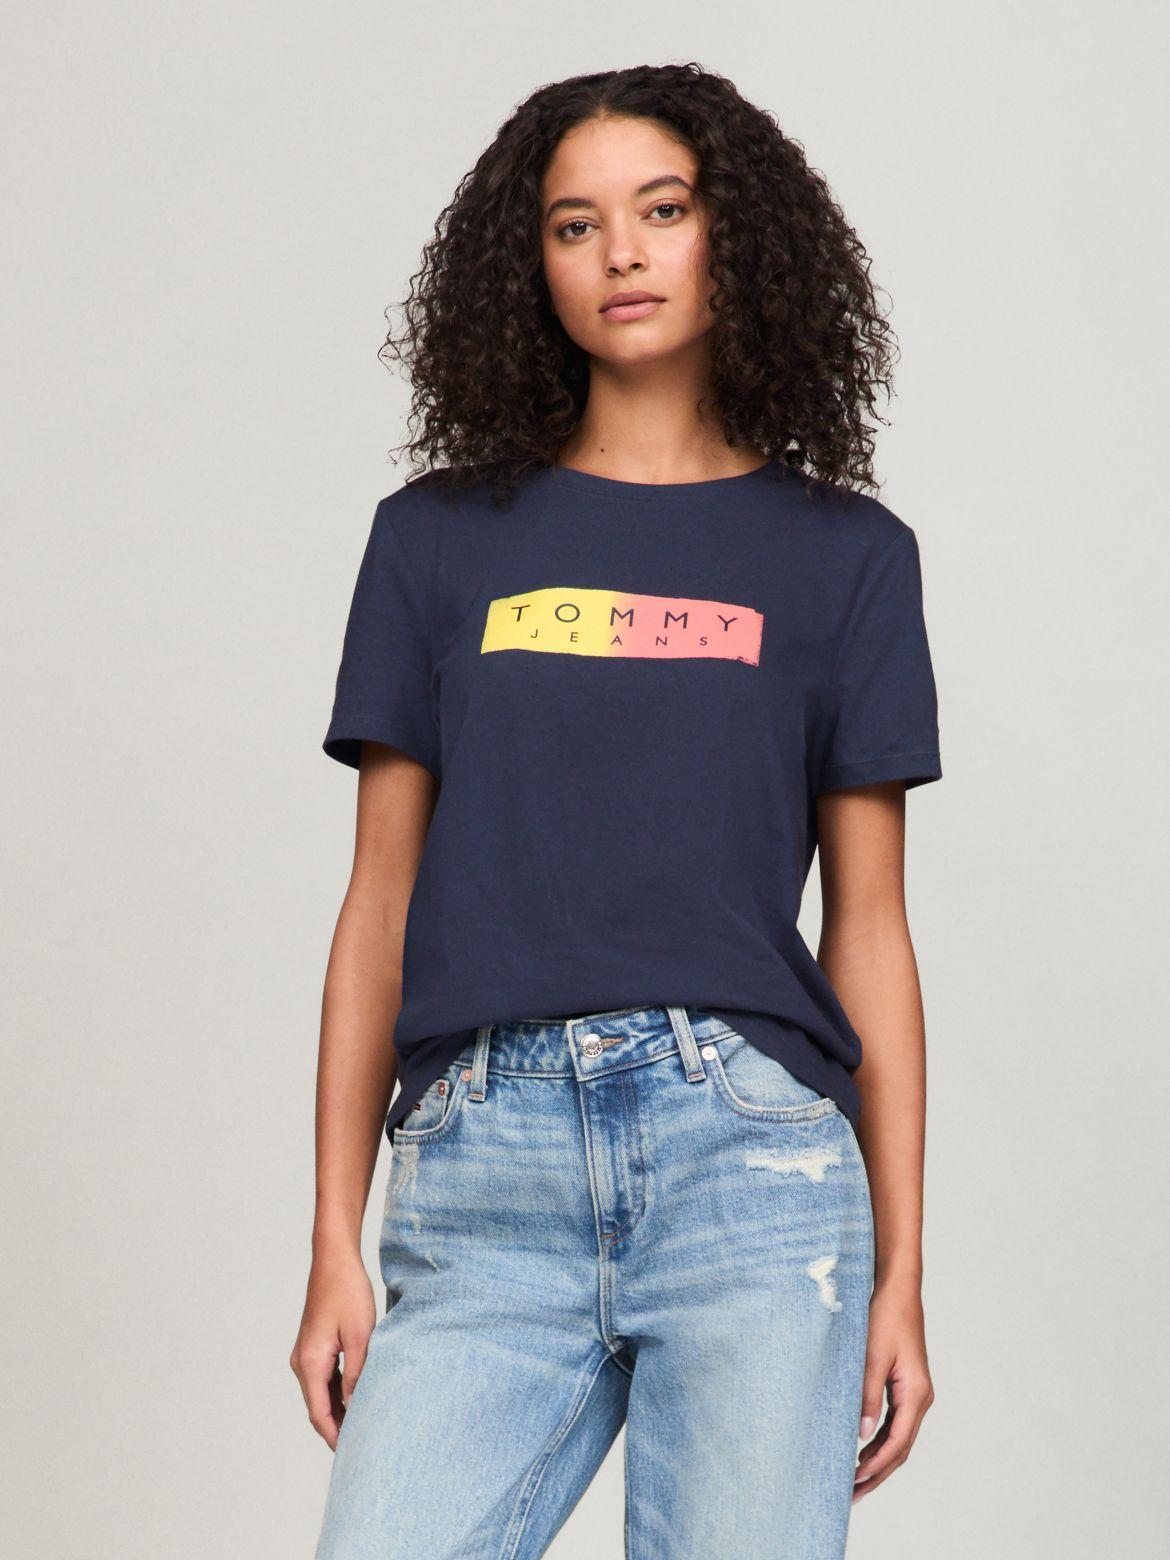 Tommy Hilfiger Women's Tommy Jeans Logo T-Shirt Product Image